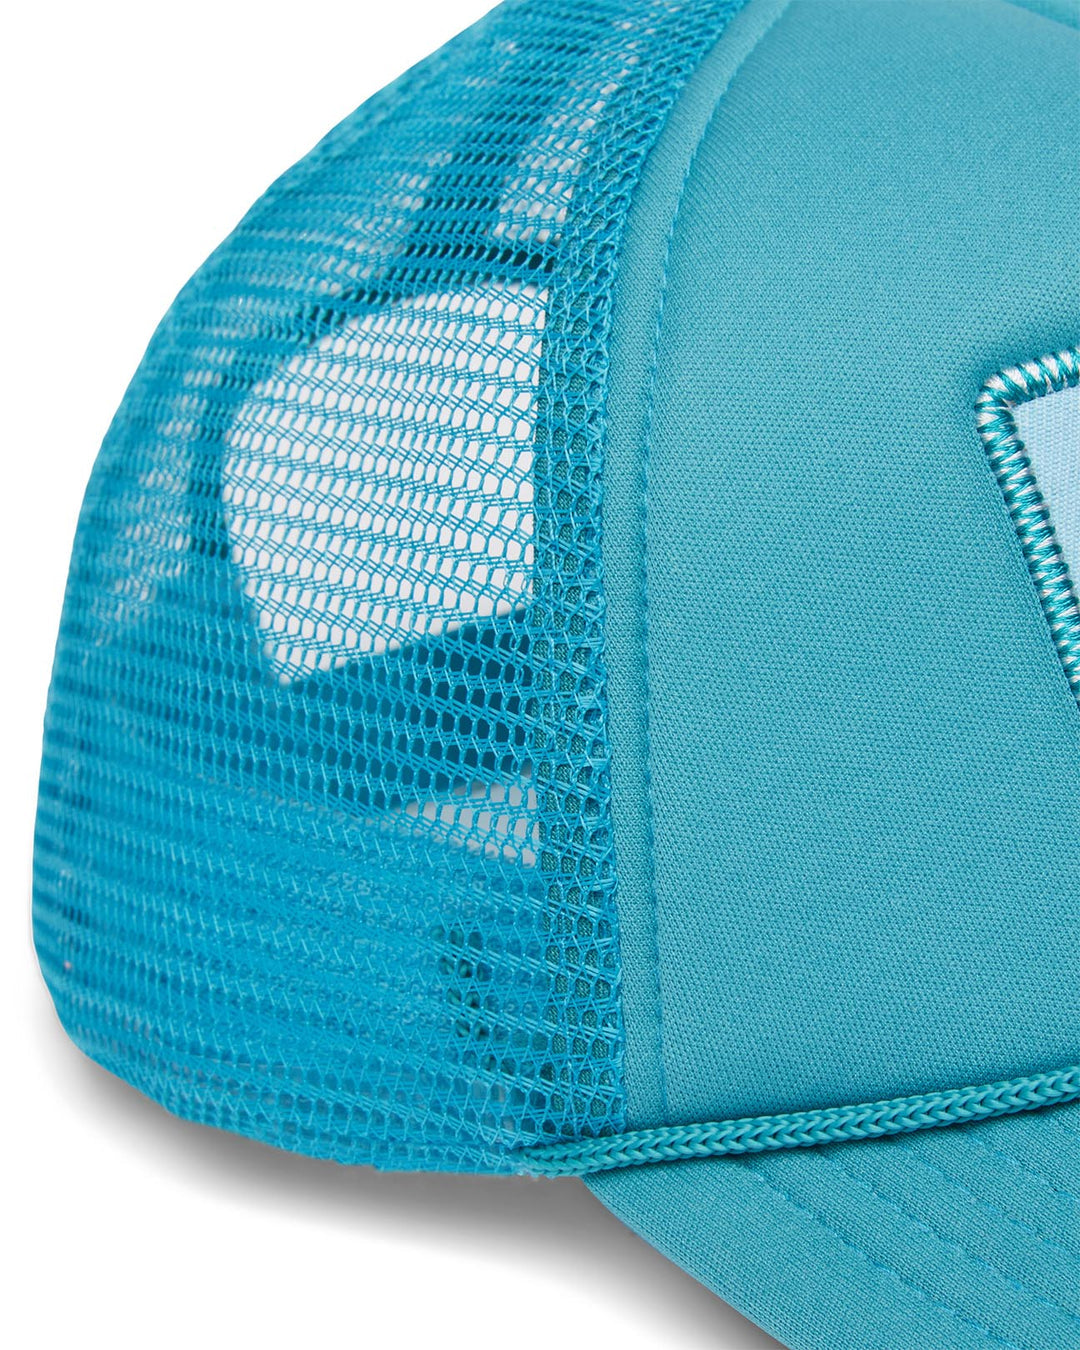 Close up view of mesh on trucker hat.